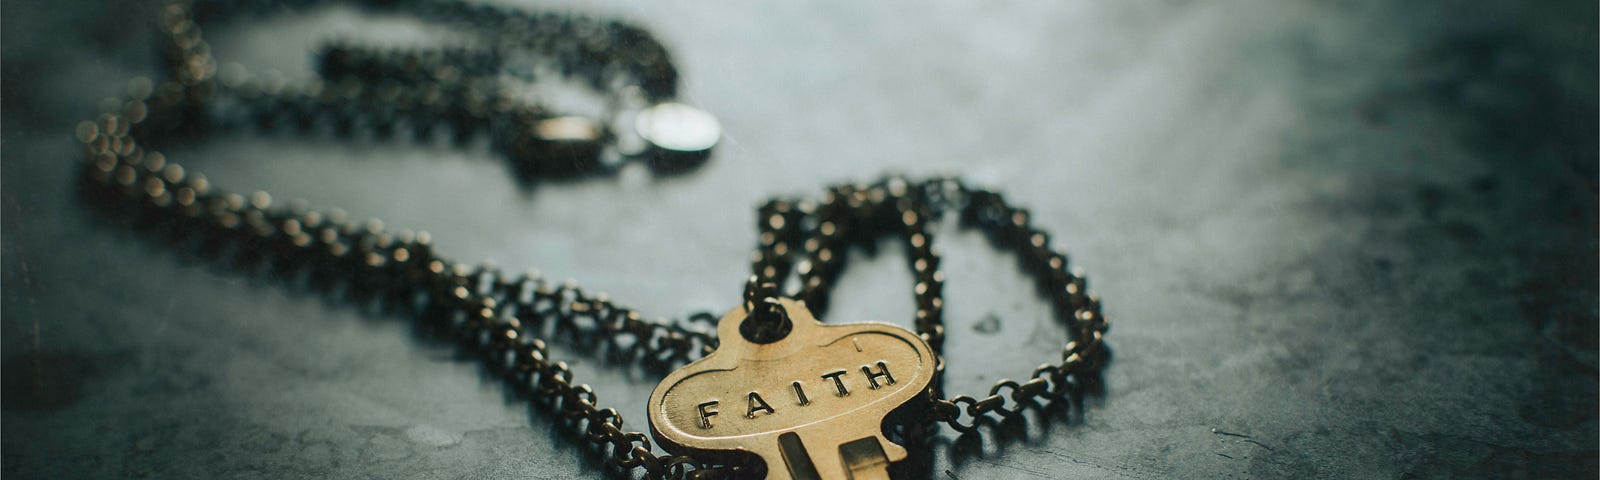 Photo of a key with the word “Faith” engraved on it, attached to a necklace.